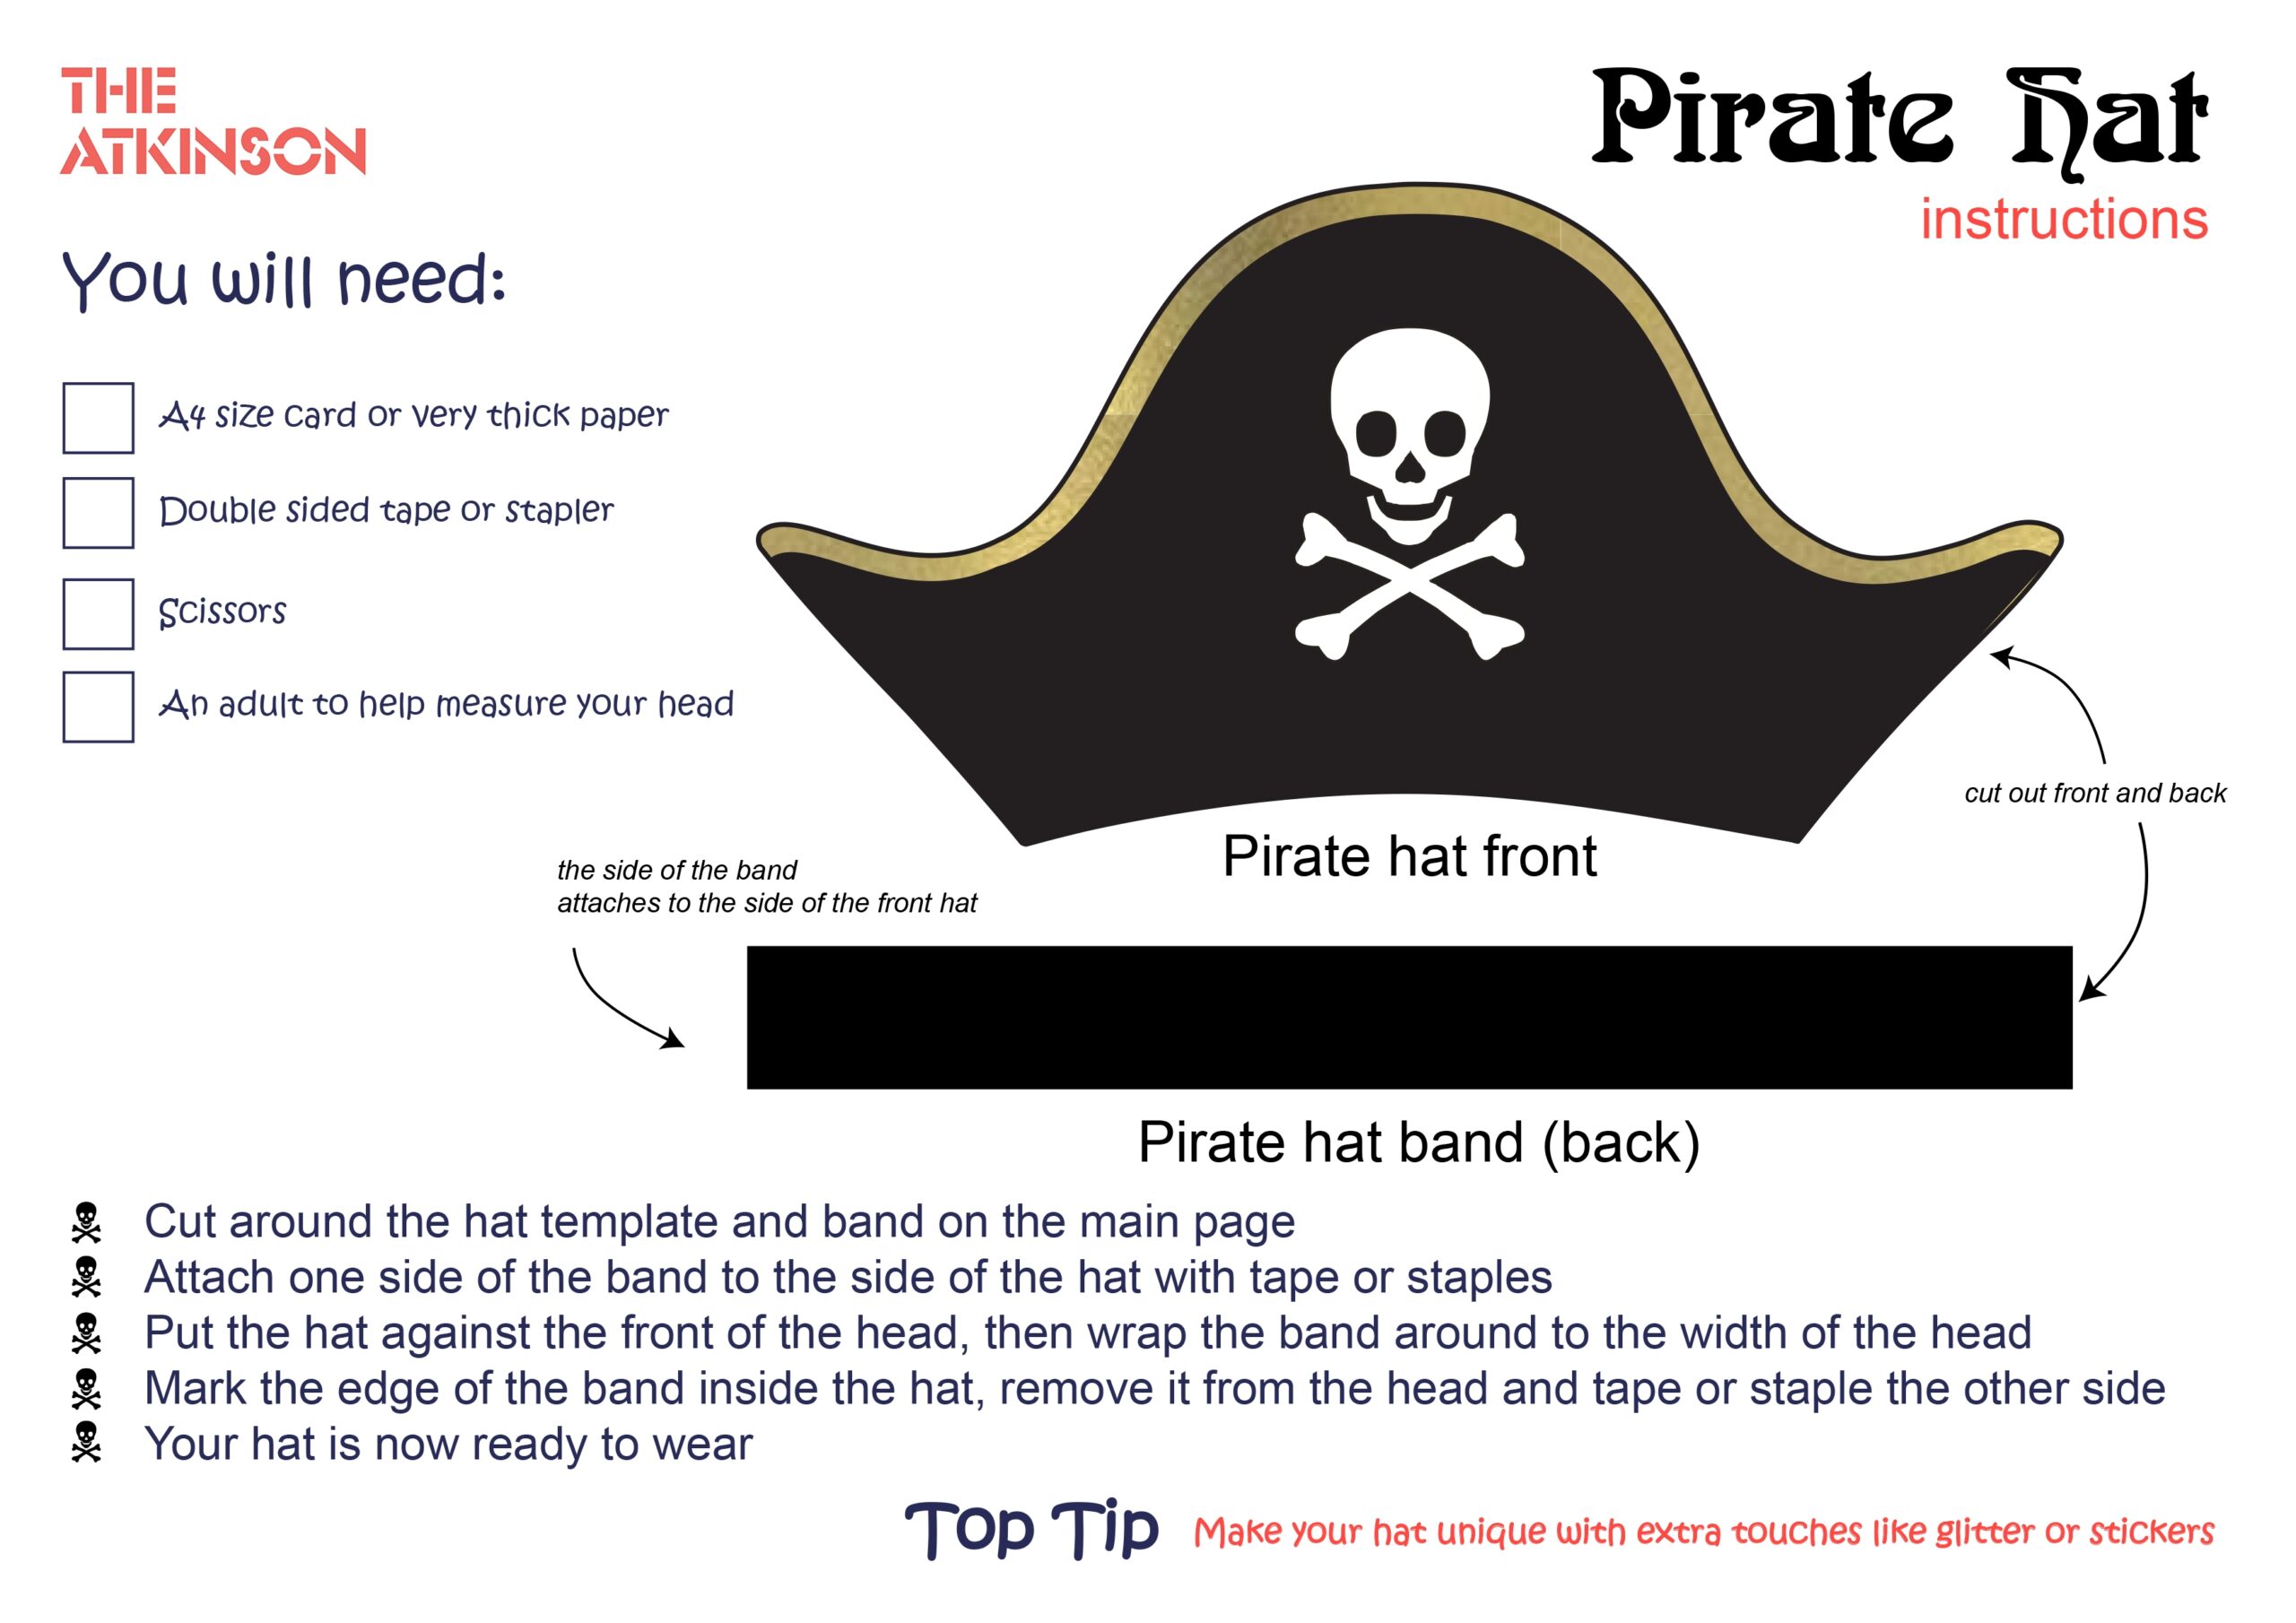 Print Your Own Pirate Hat The AtkinsonThe Atkinson